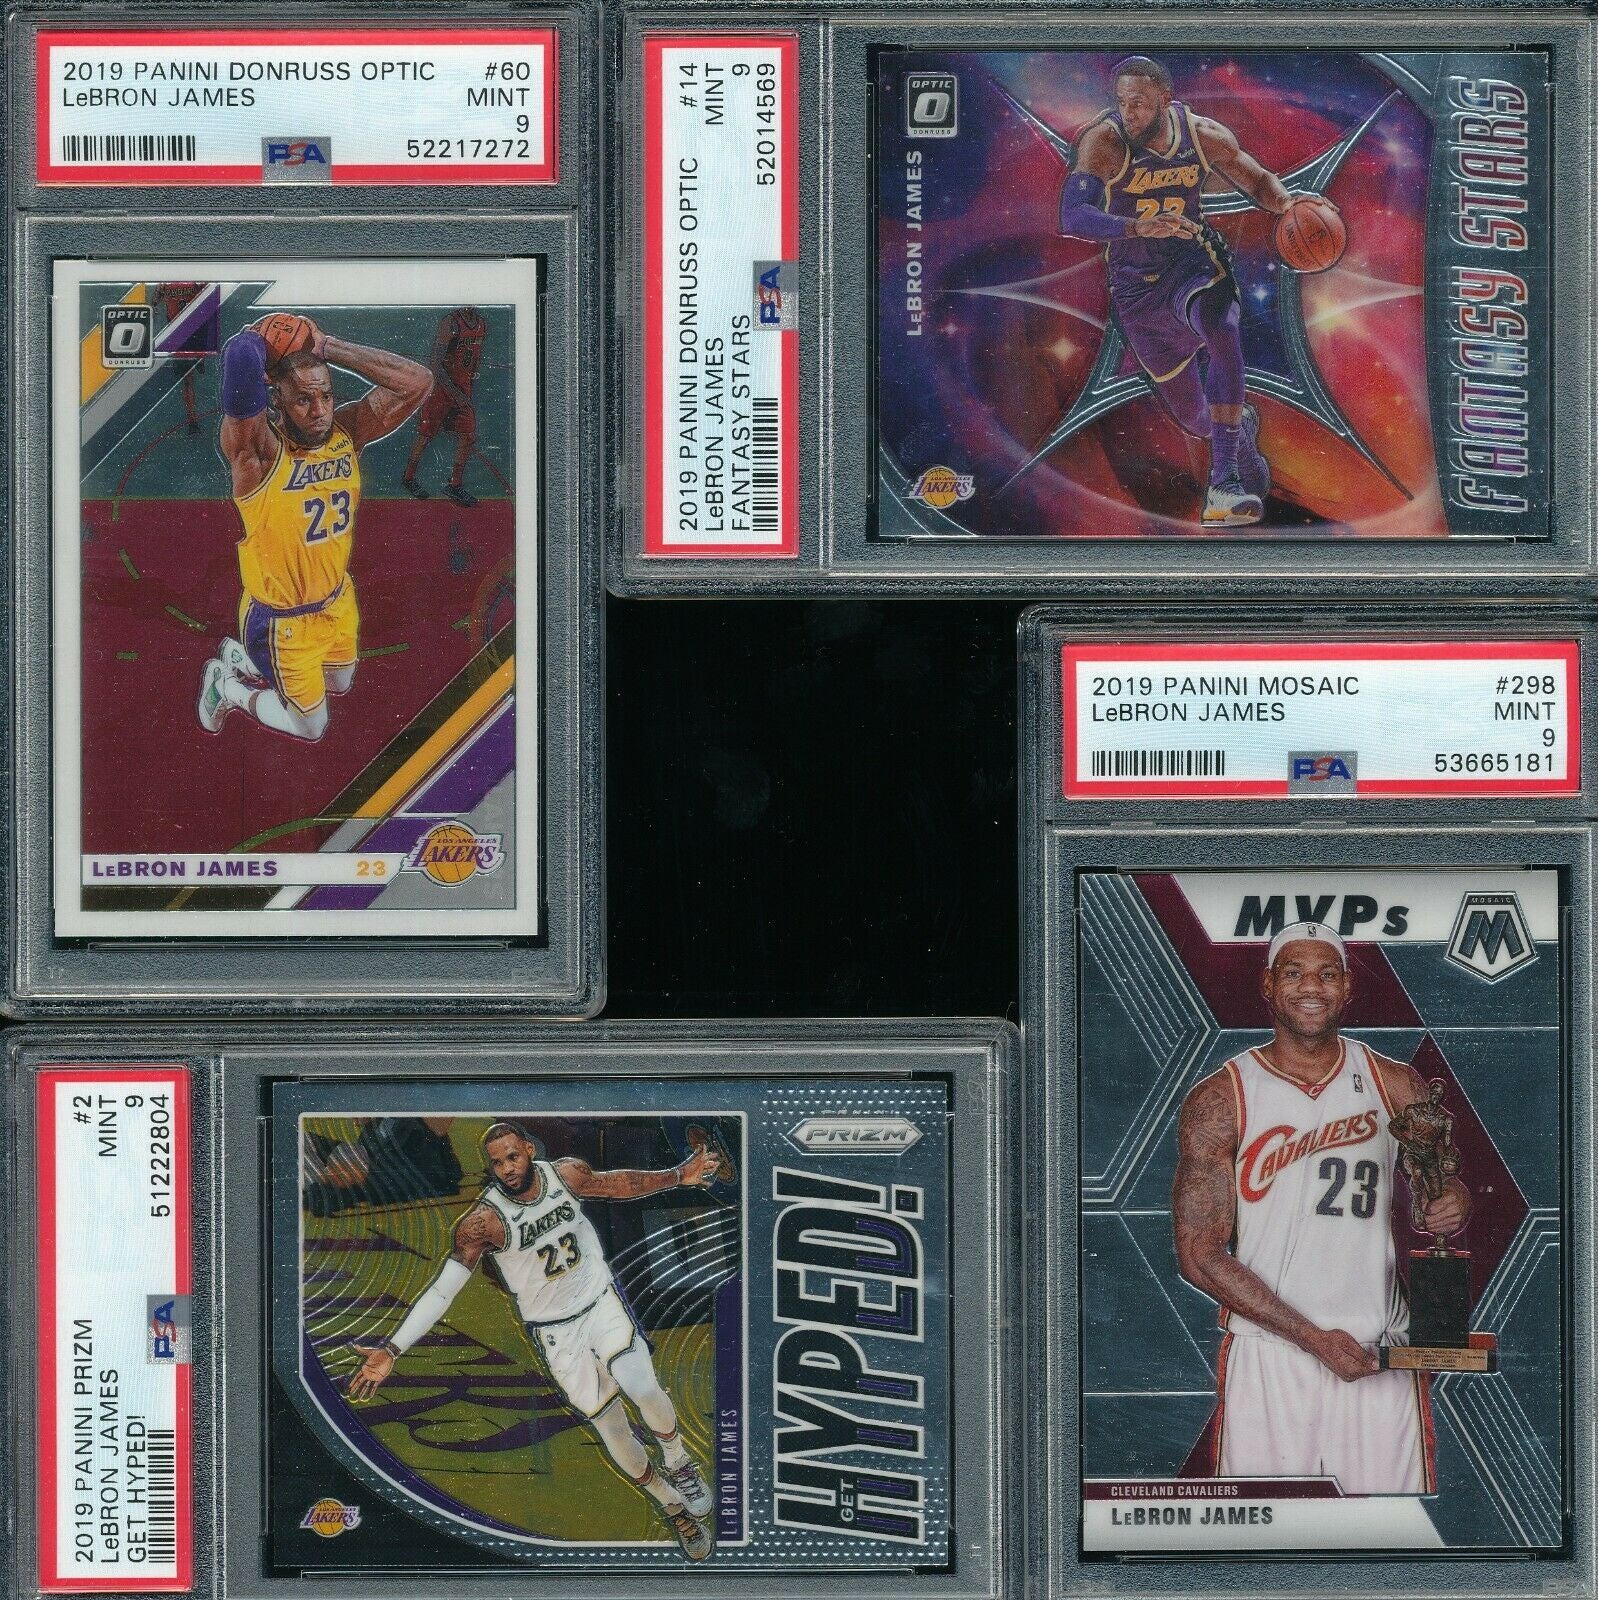 Lebron James - GRADED NBA Basketball Card REPACK - 1x Sports Card Single (Graded 6 or Higher, Various Grading Companies, Randomly Selected,  Stock Photo - Will Not Get Cards In Picture, Used as an Example Only)